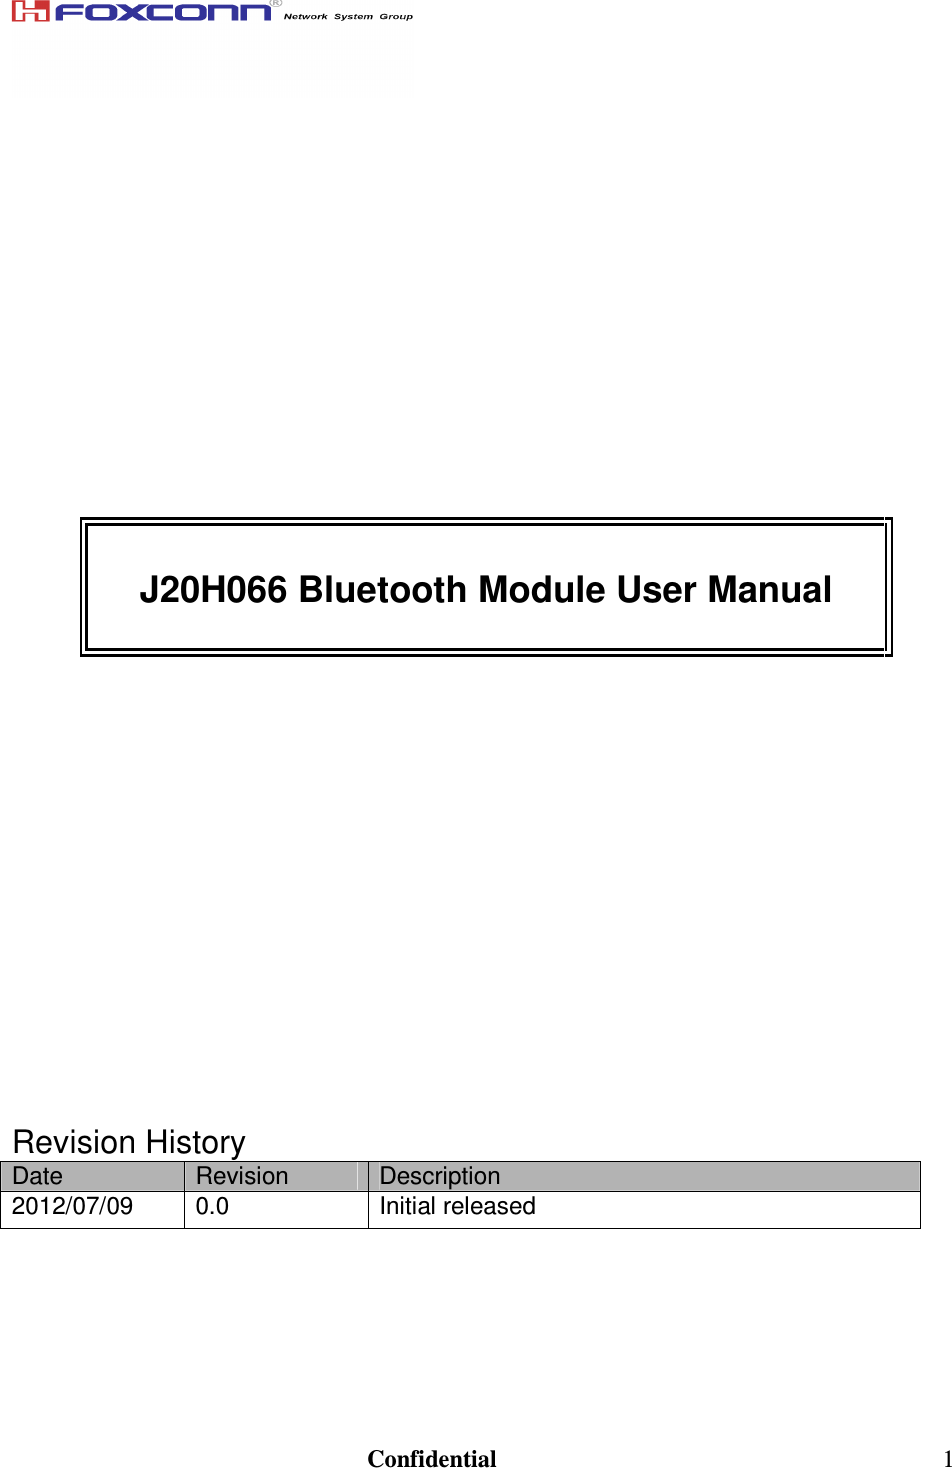                                                                               Confidential  1                    J20H066 Bluetooth Module User Manual                 Revision History Date  Revision  Description 2012/07/09  0.0  Initial released      